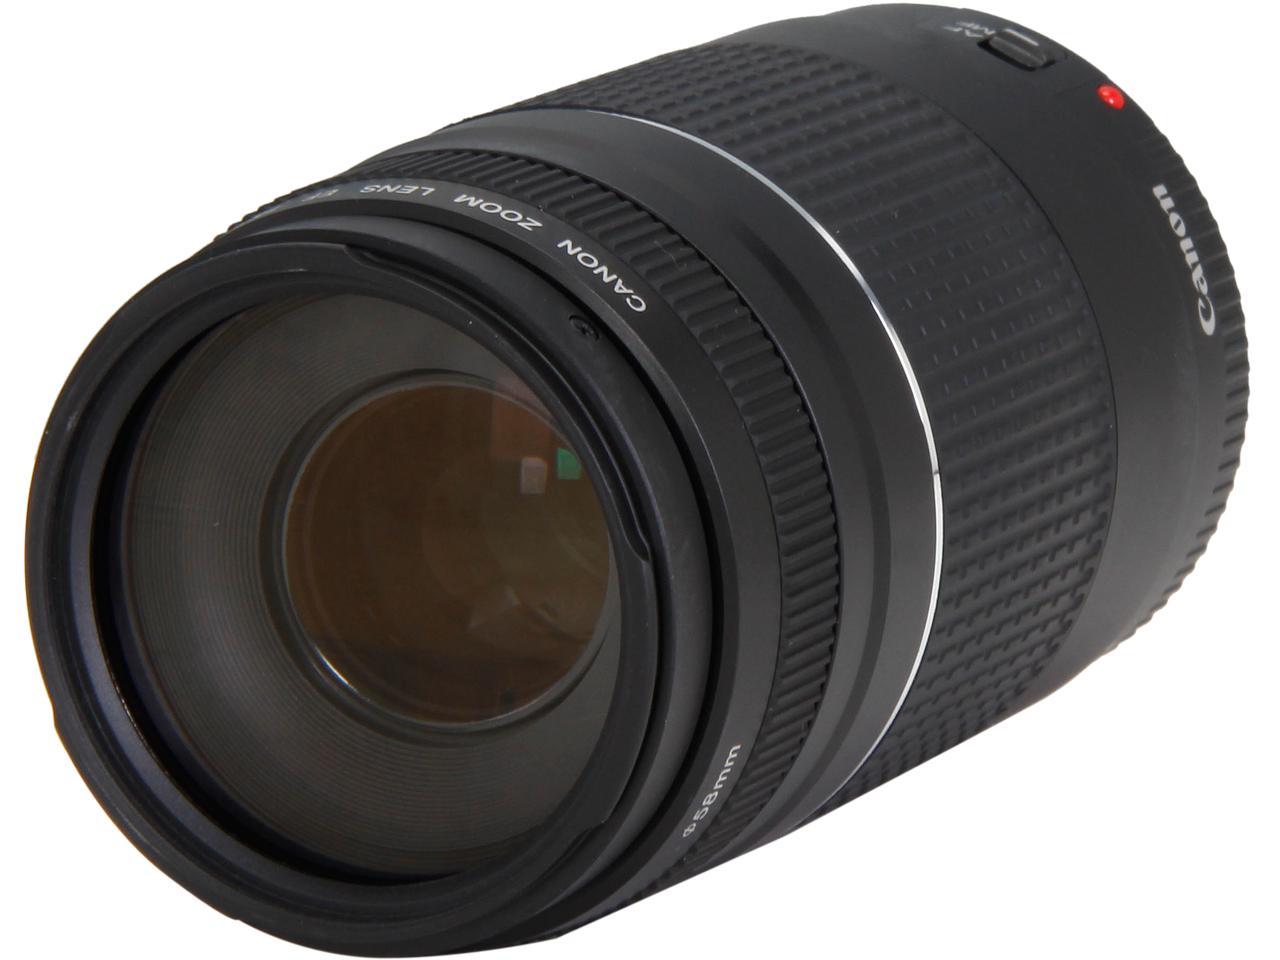 Canon EF 75-300mm f/4-5.6 III Telephoto Zoom Lens for Canon SLR Cameras 